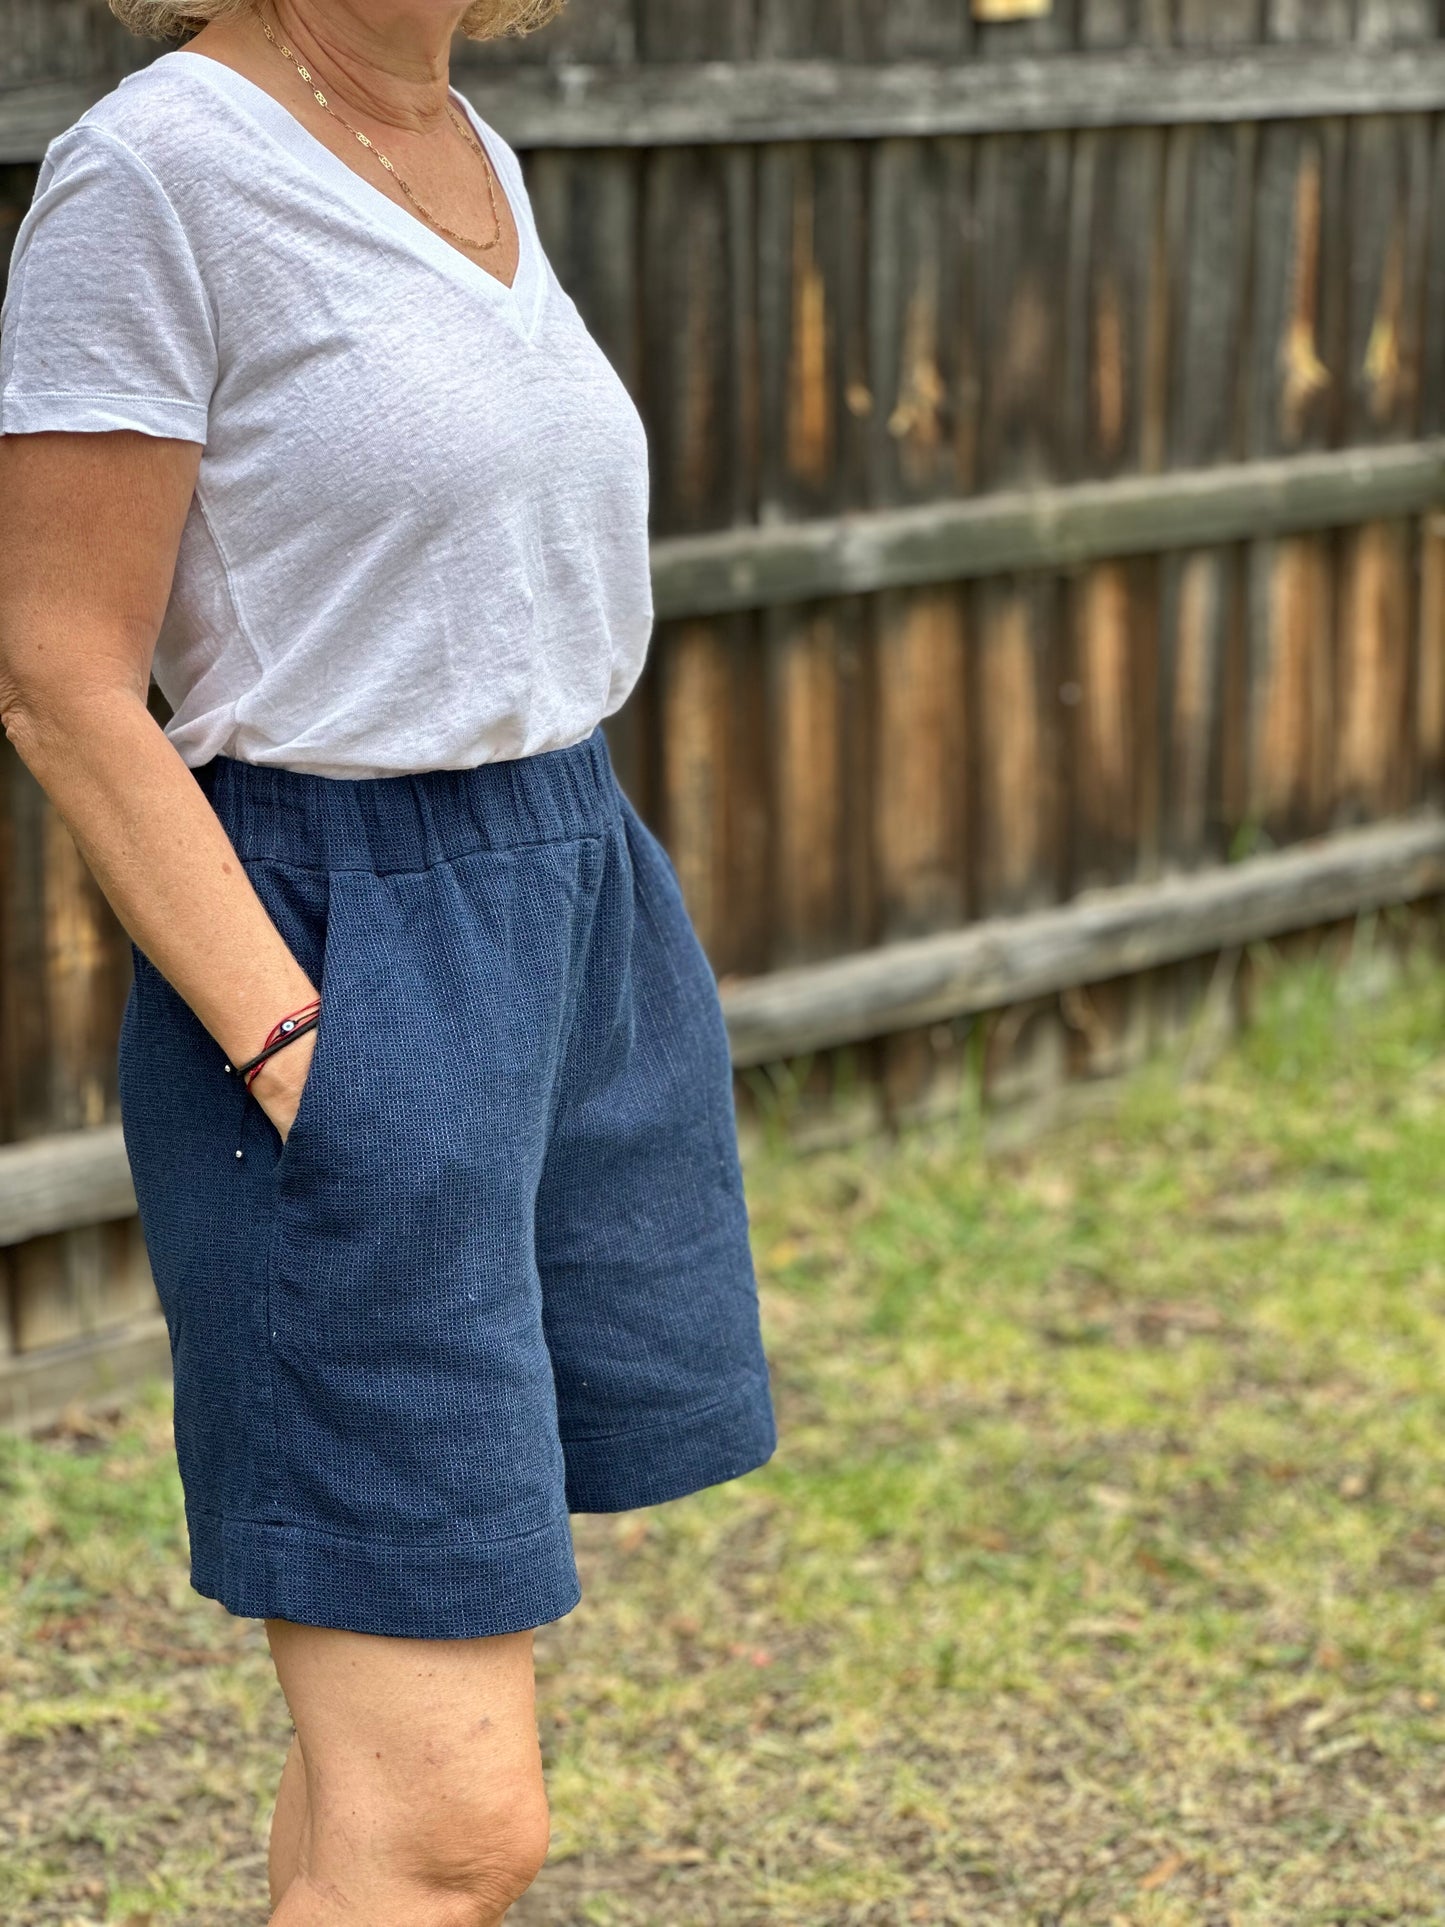 MARLO High waisted everyday shorts PDF Sewing Pattern